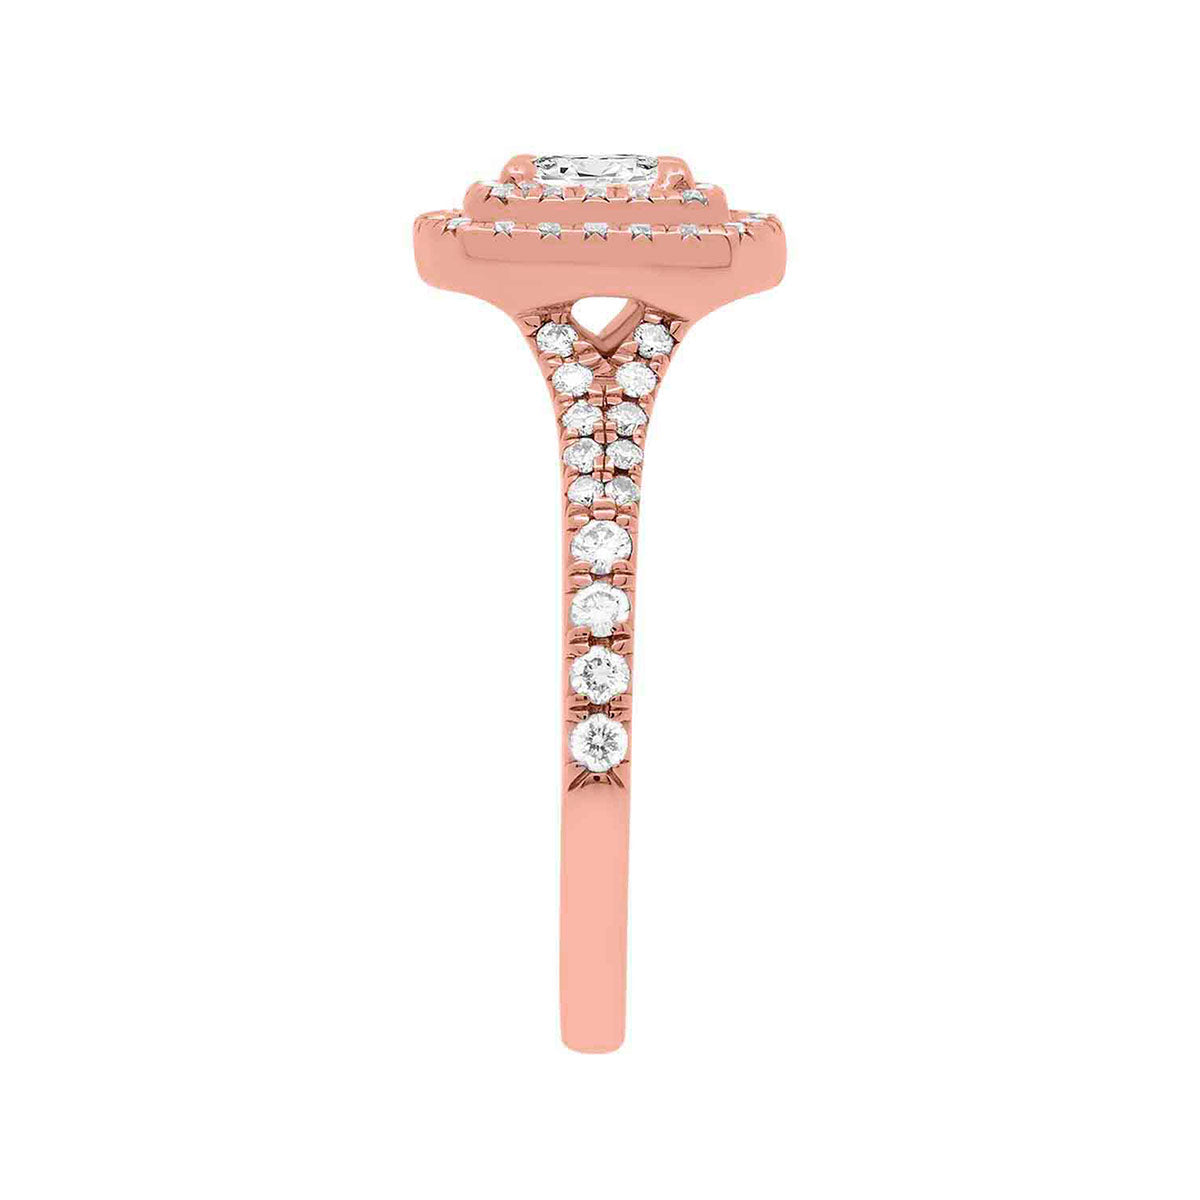 Double Halo Cushion Cut Diamond Ring in rose gold in a  side view position